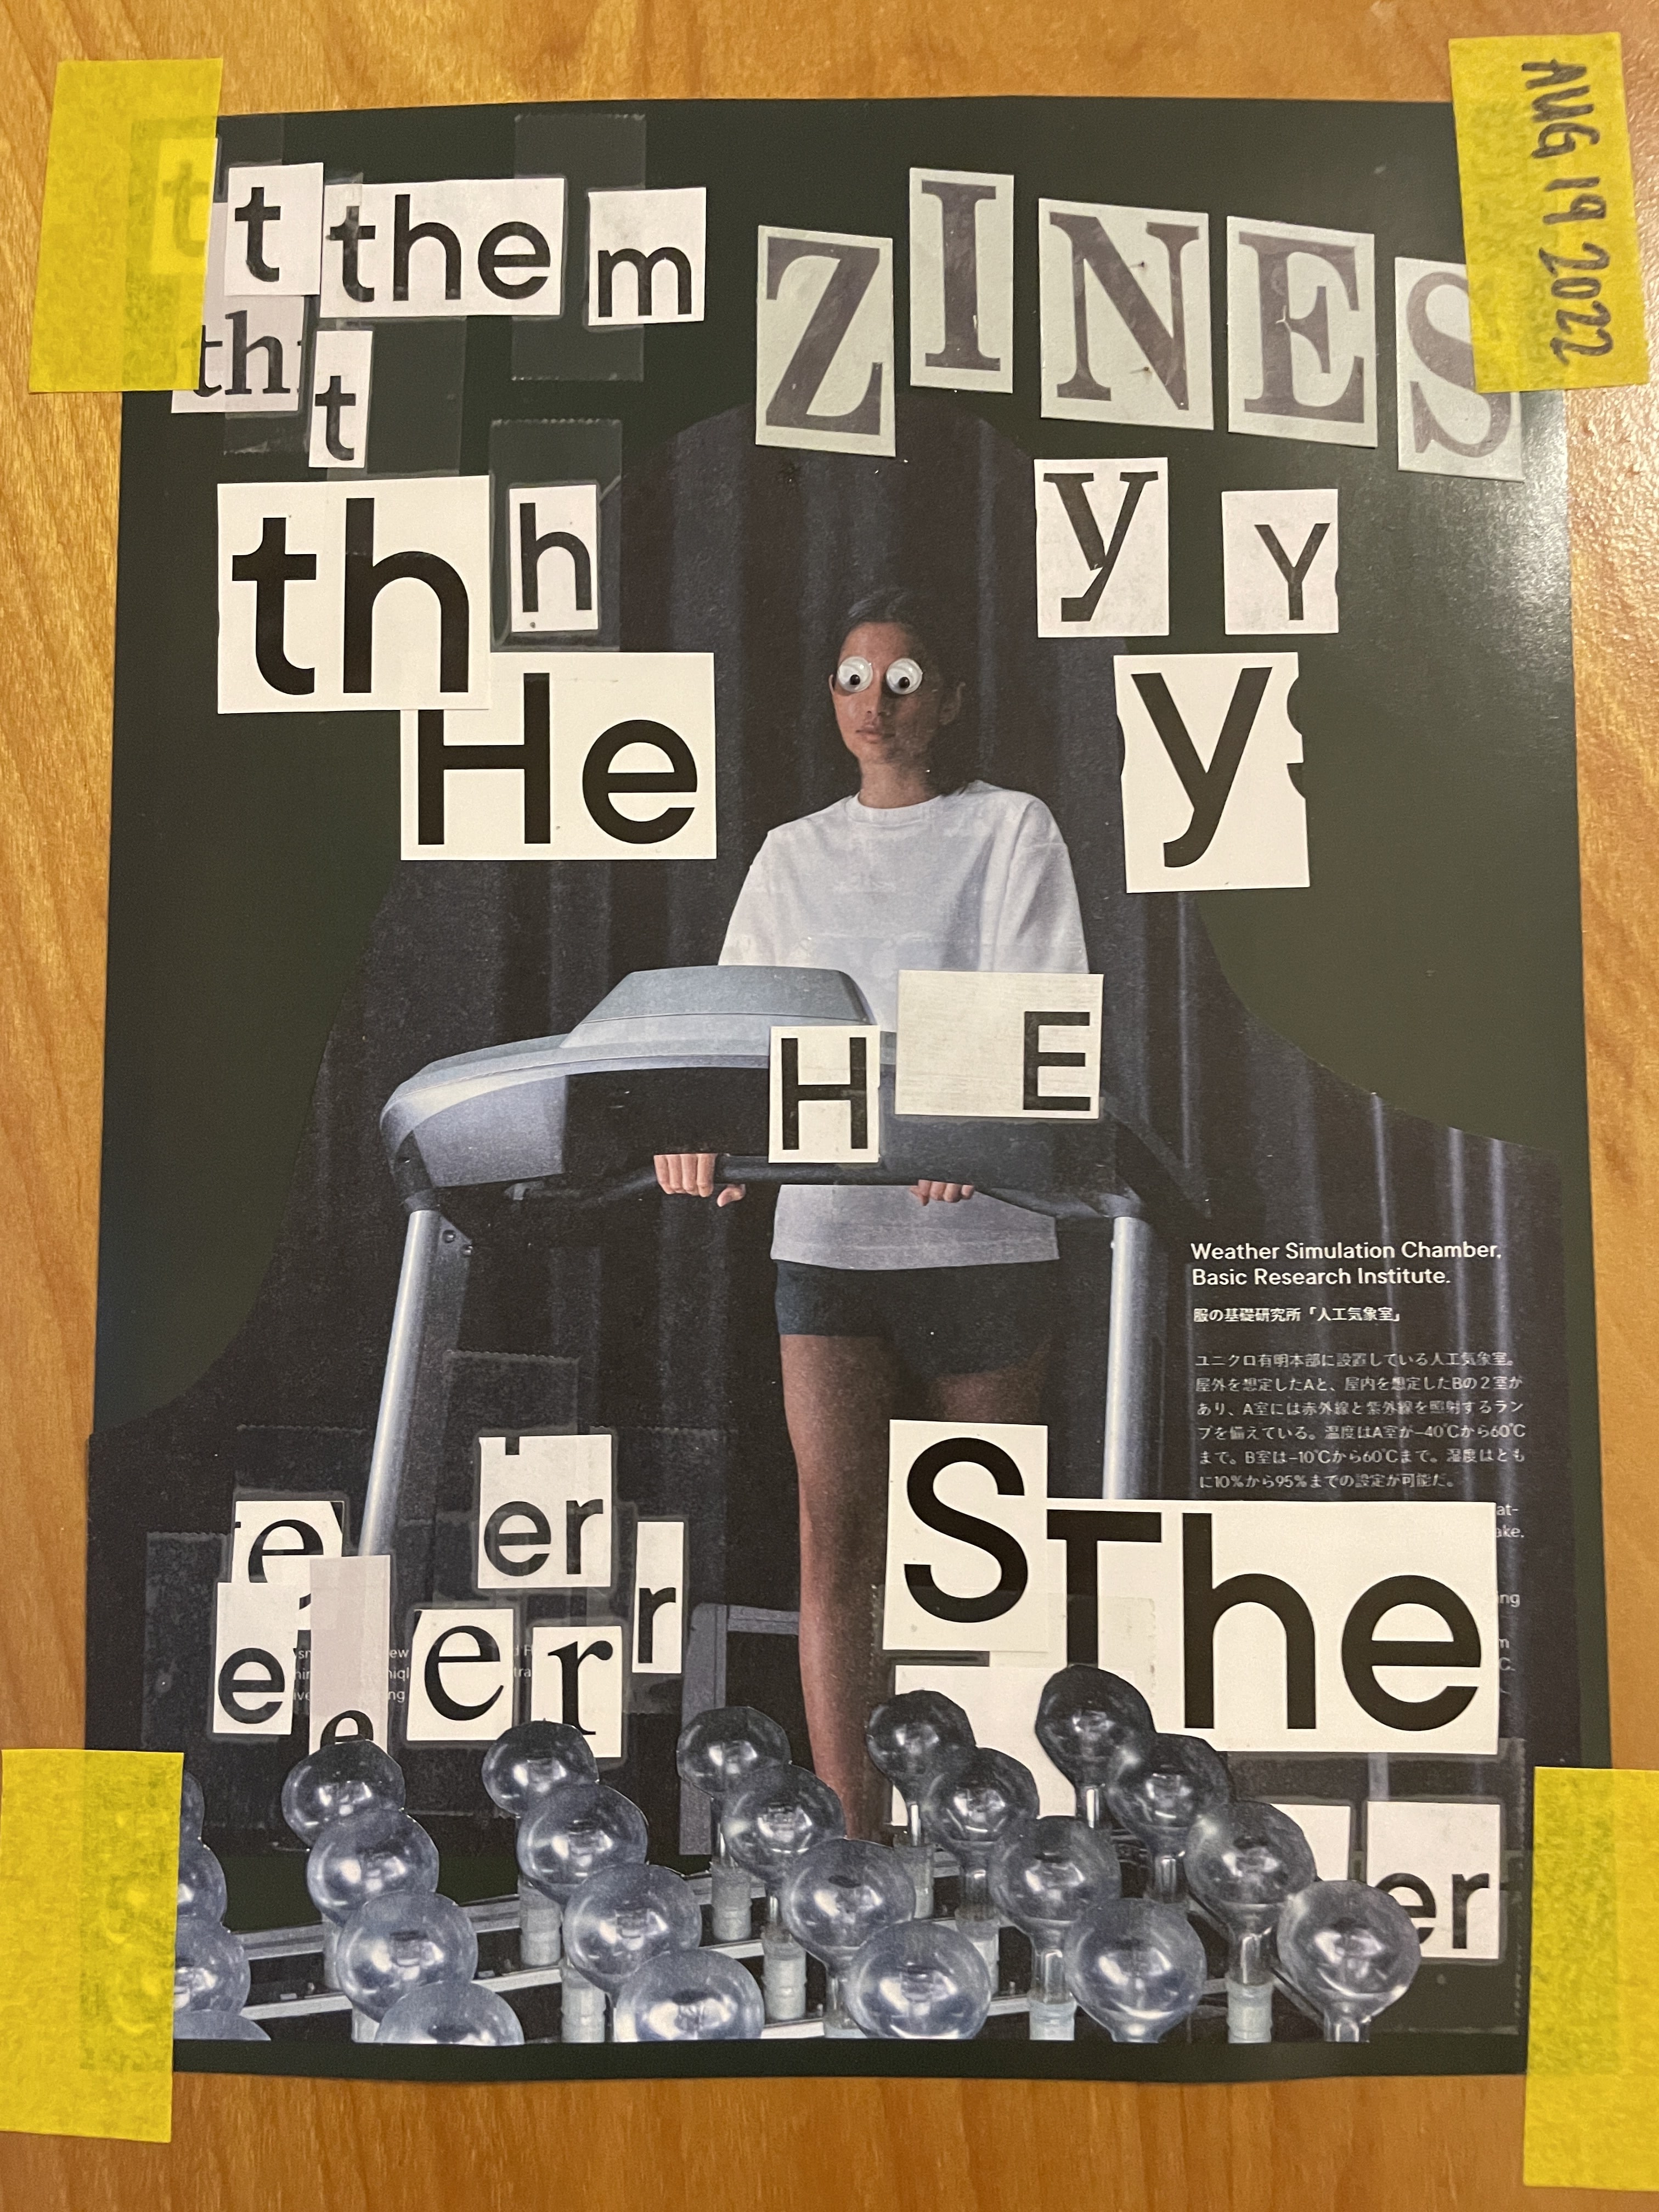 A collage. Lots of the letters E, H, M, R, S, T, and Y (sans-serif) are scattered about, occasional spelling out into pronouns. ZINES is also spelled out in a serif font. In the background there is a person walking on a treadmill. Googly eyes are glued over their eyes. In the foreground is a cutout of several rows of what look like large lightbulbs.